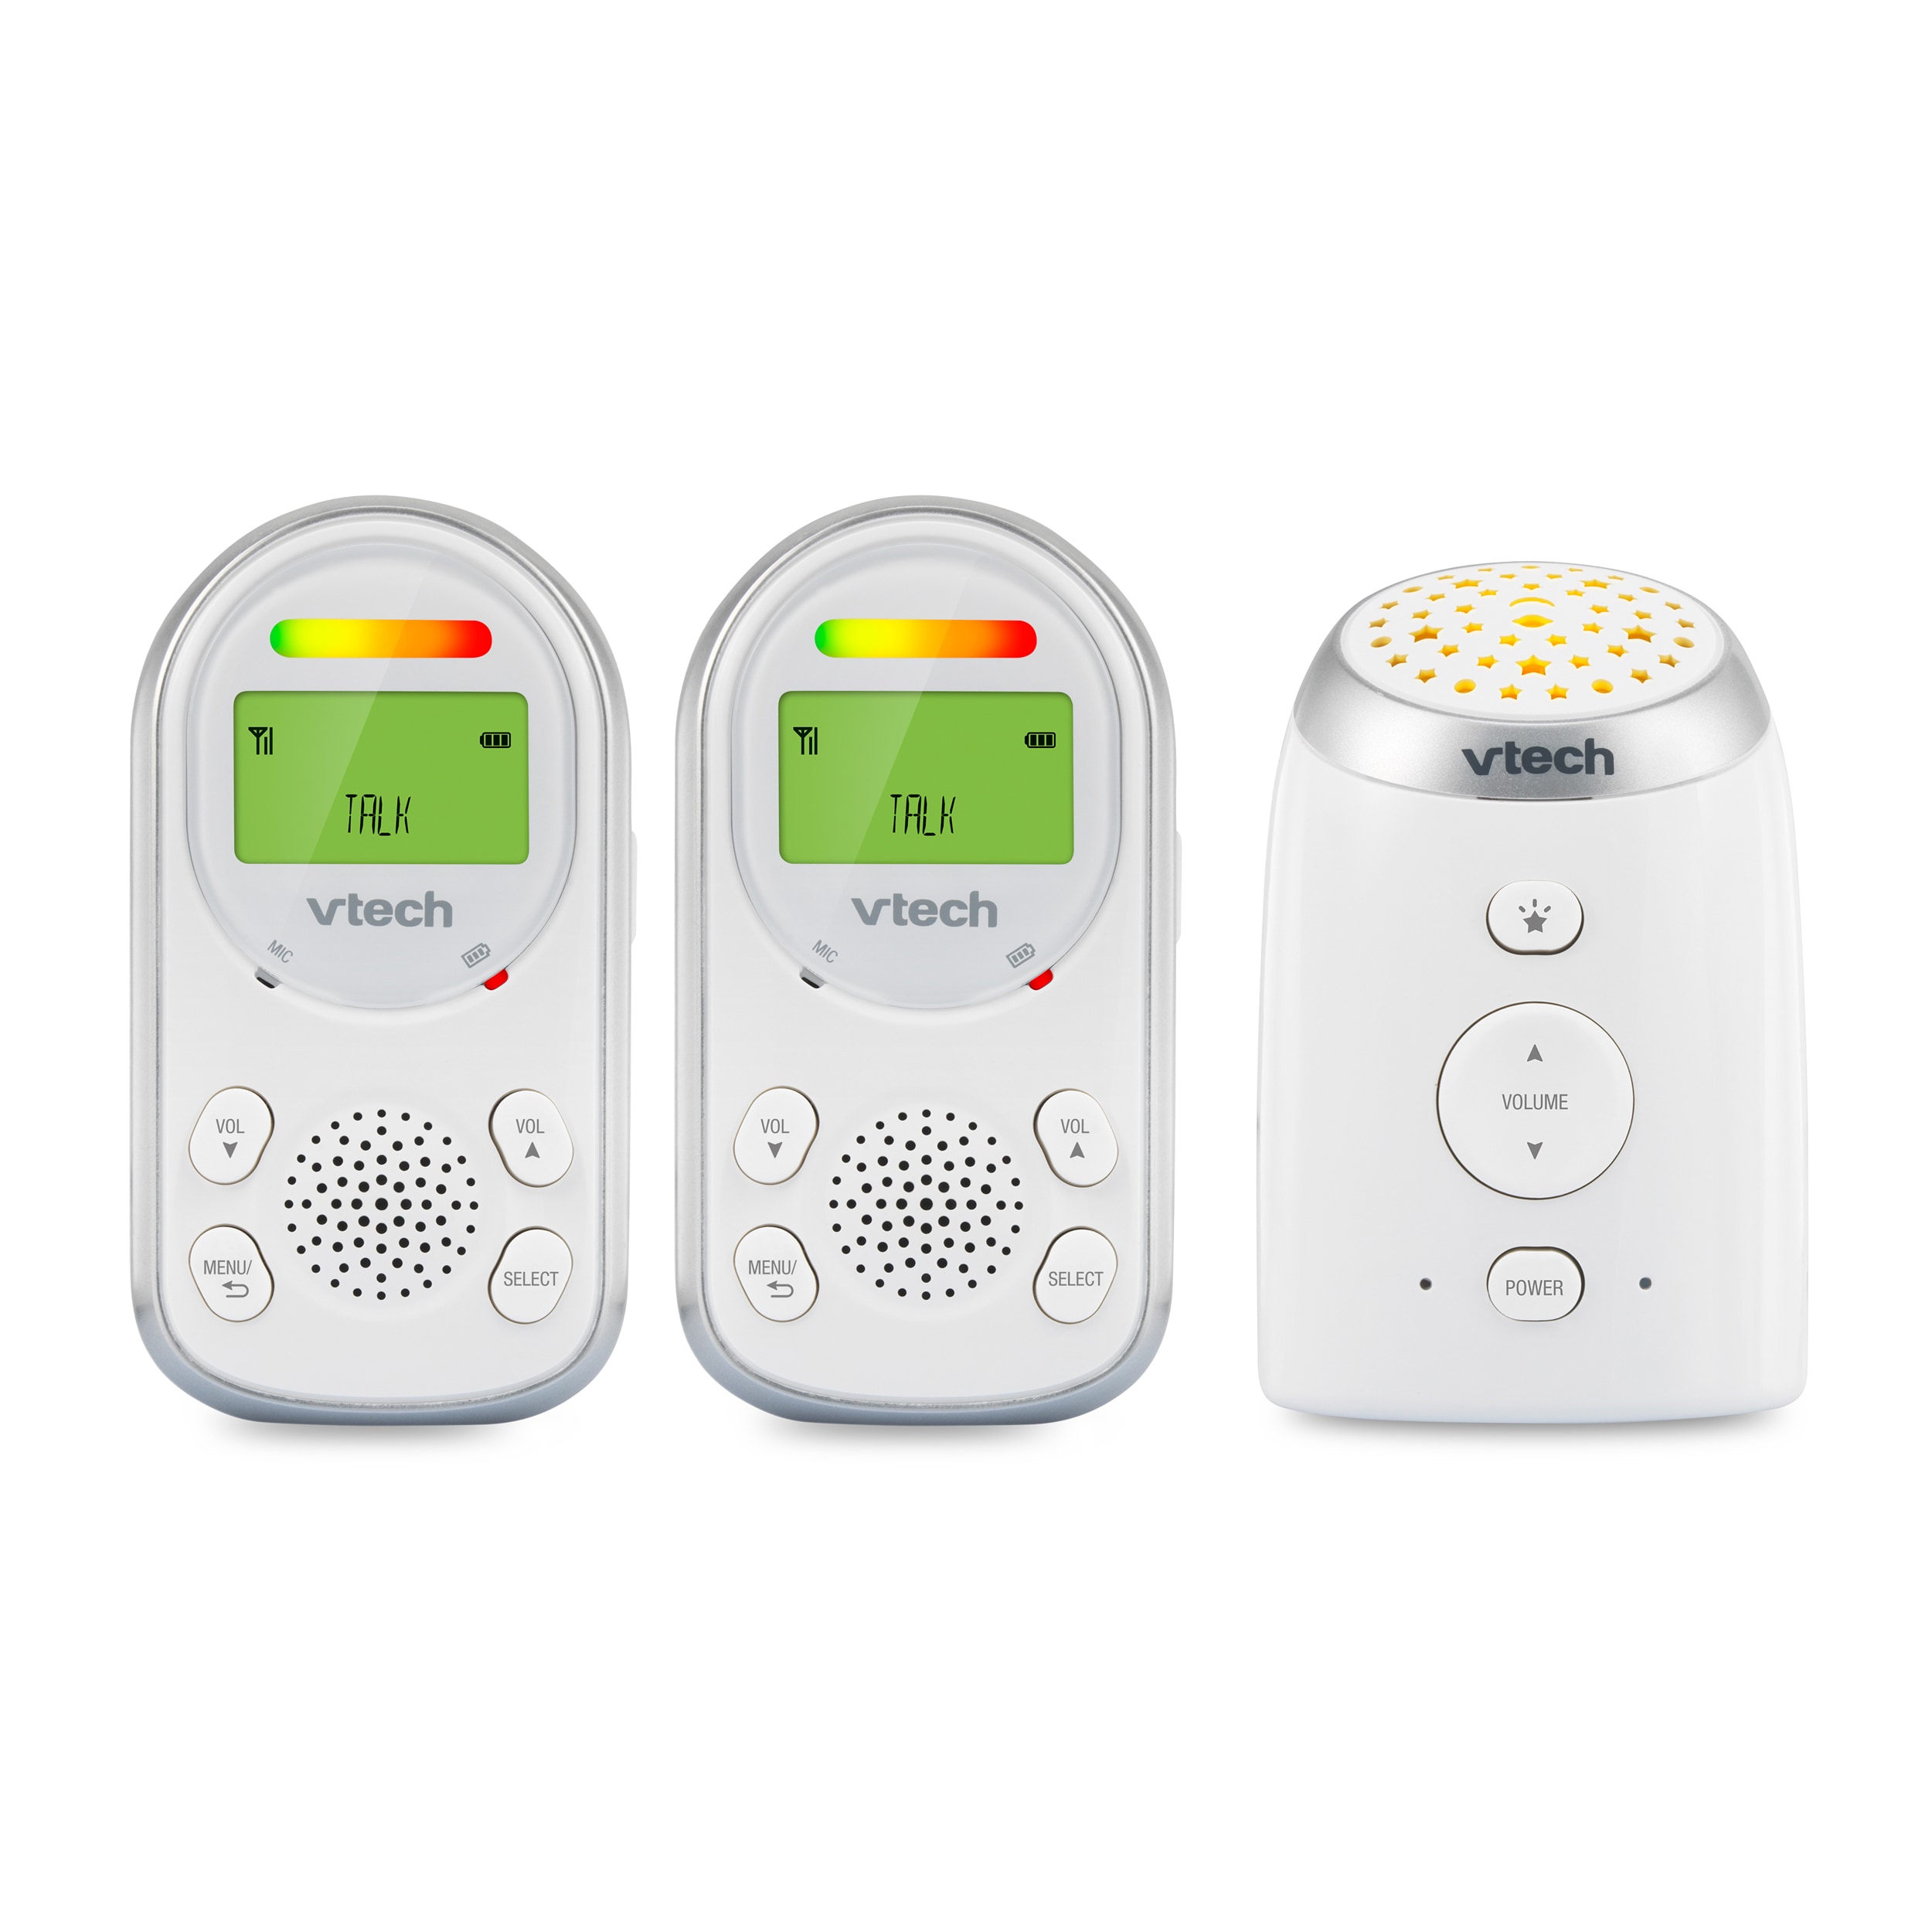 Audio Baby Monitor with 2 Parent Units, up to 1,000 ft of Range and Vibrating Sound-Alert in White | - VTech TM8212-2